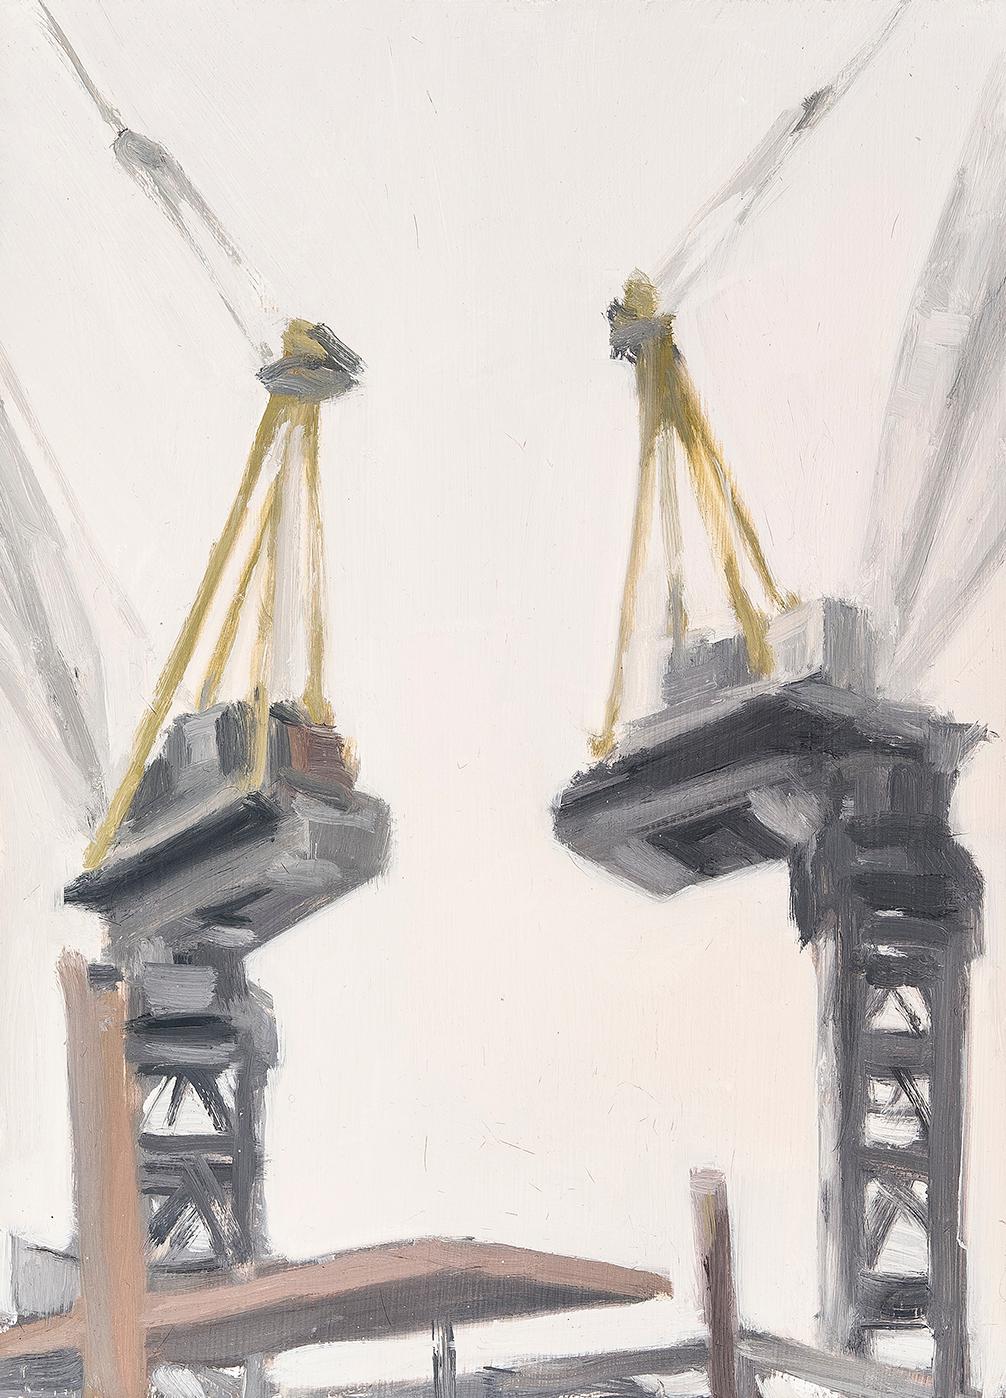 Two Cranes, with Platform  - Painting by Diana Horowitz